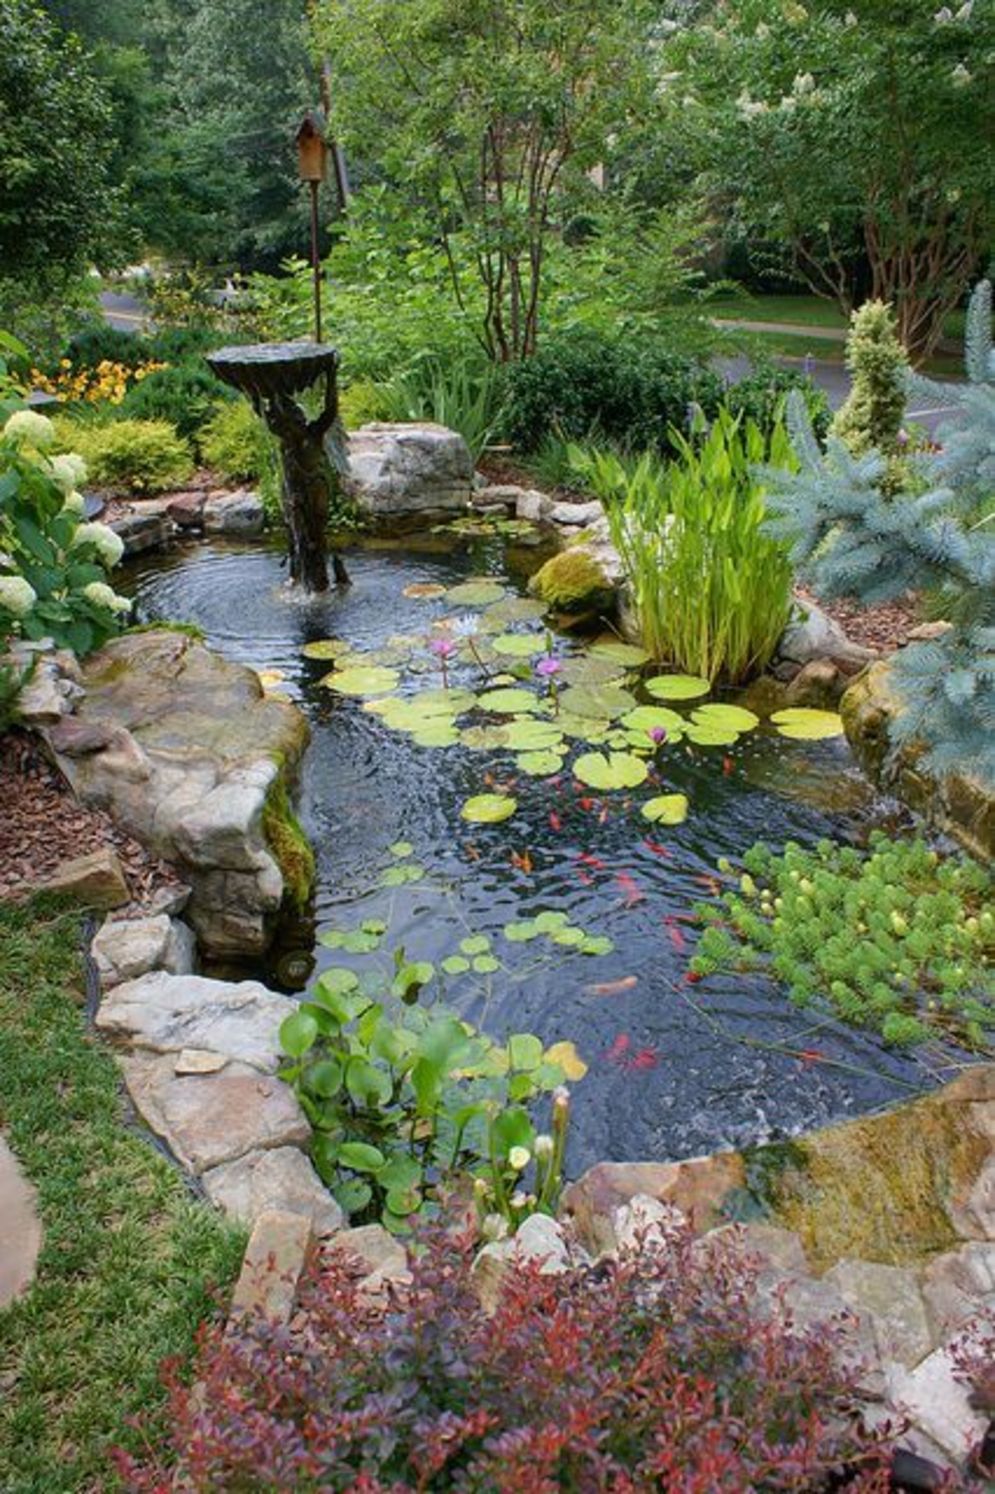 Transform Your Outdoor Space with a Beautiful Backyard Pond